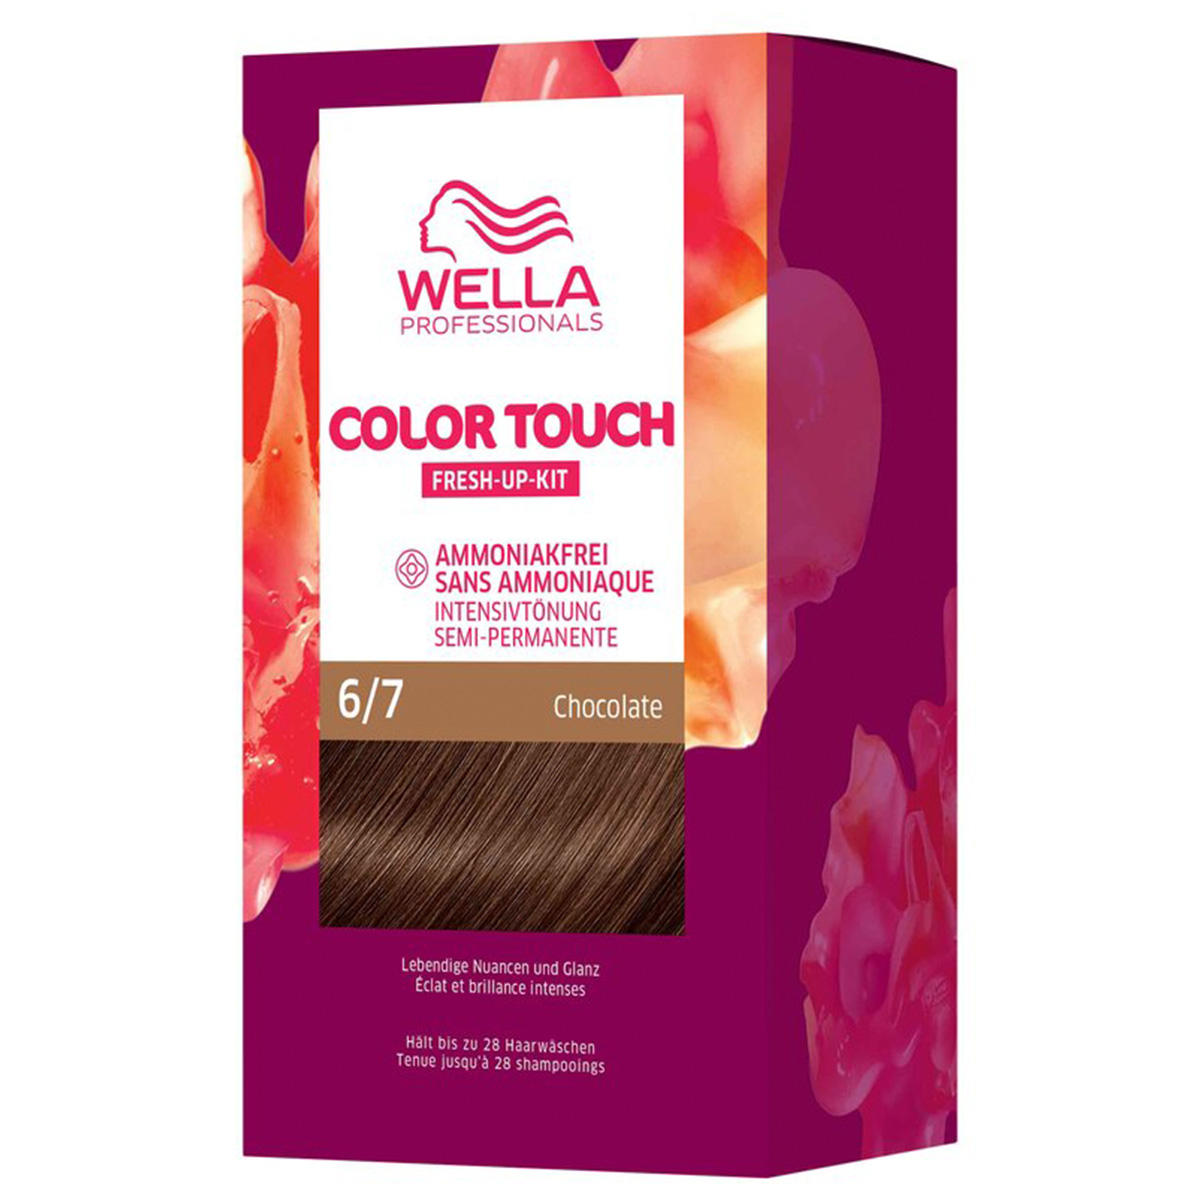 Wella Color Touch Fresh-Up-Kit 6/7 Biondo scuro 130 ml - 1